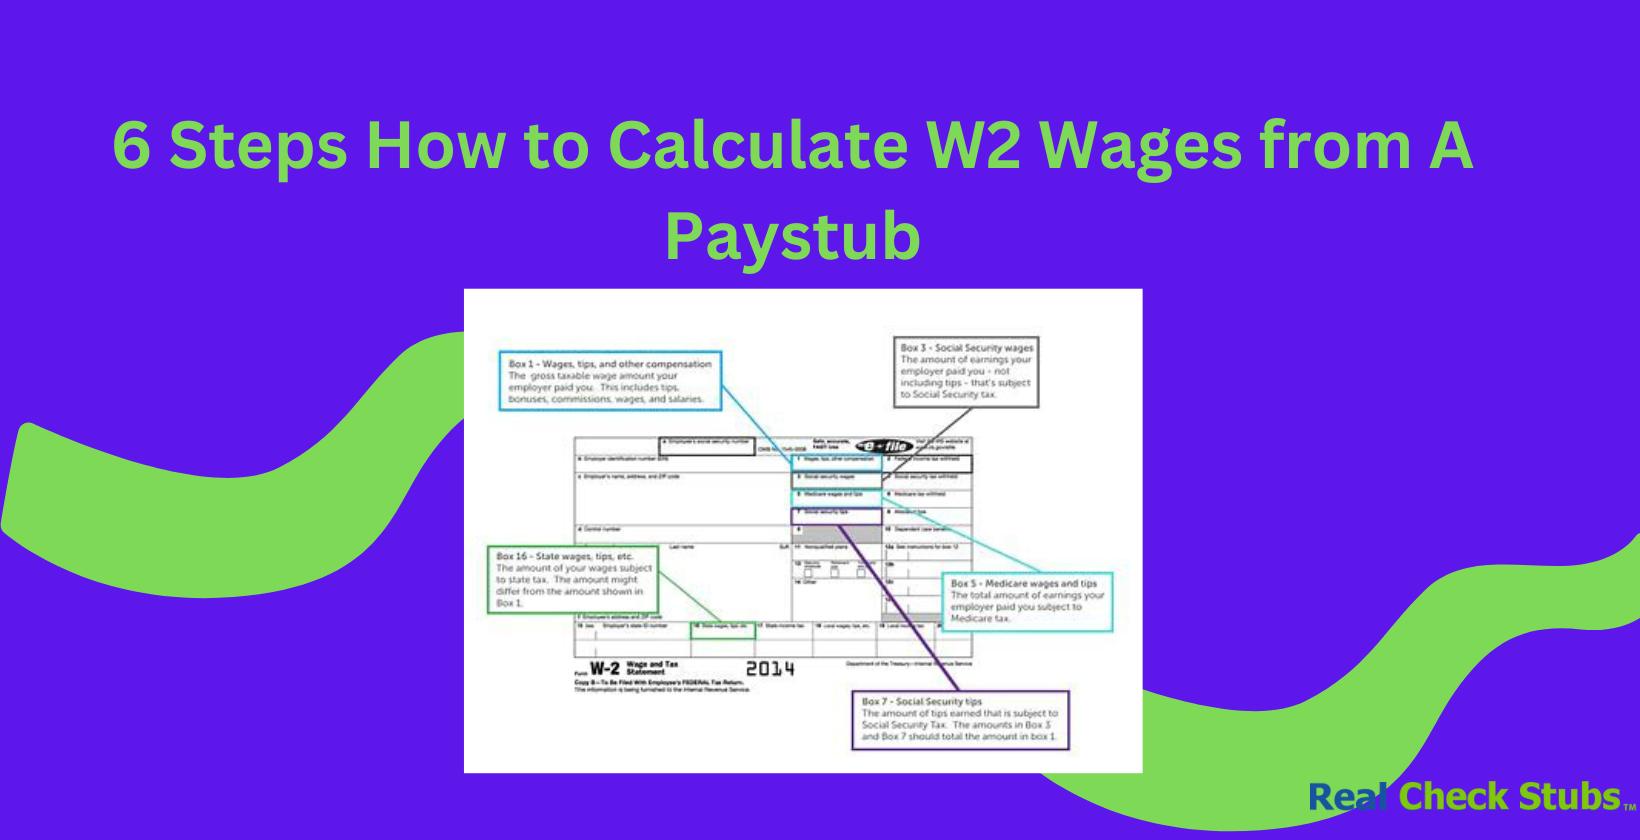 6 Steps How to Calculate W2 Wages from Paystub